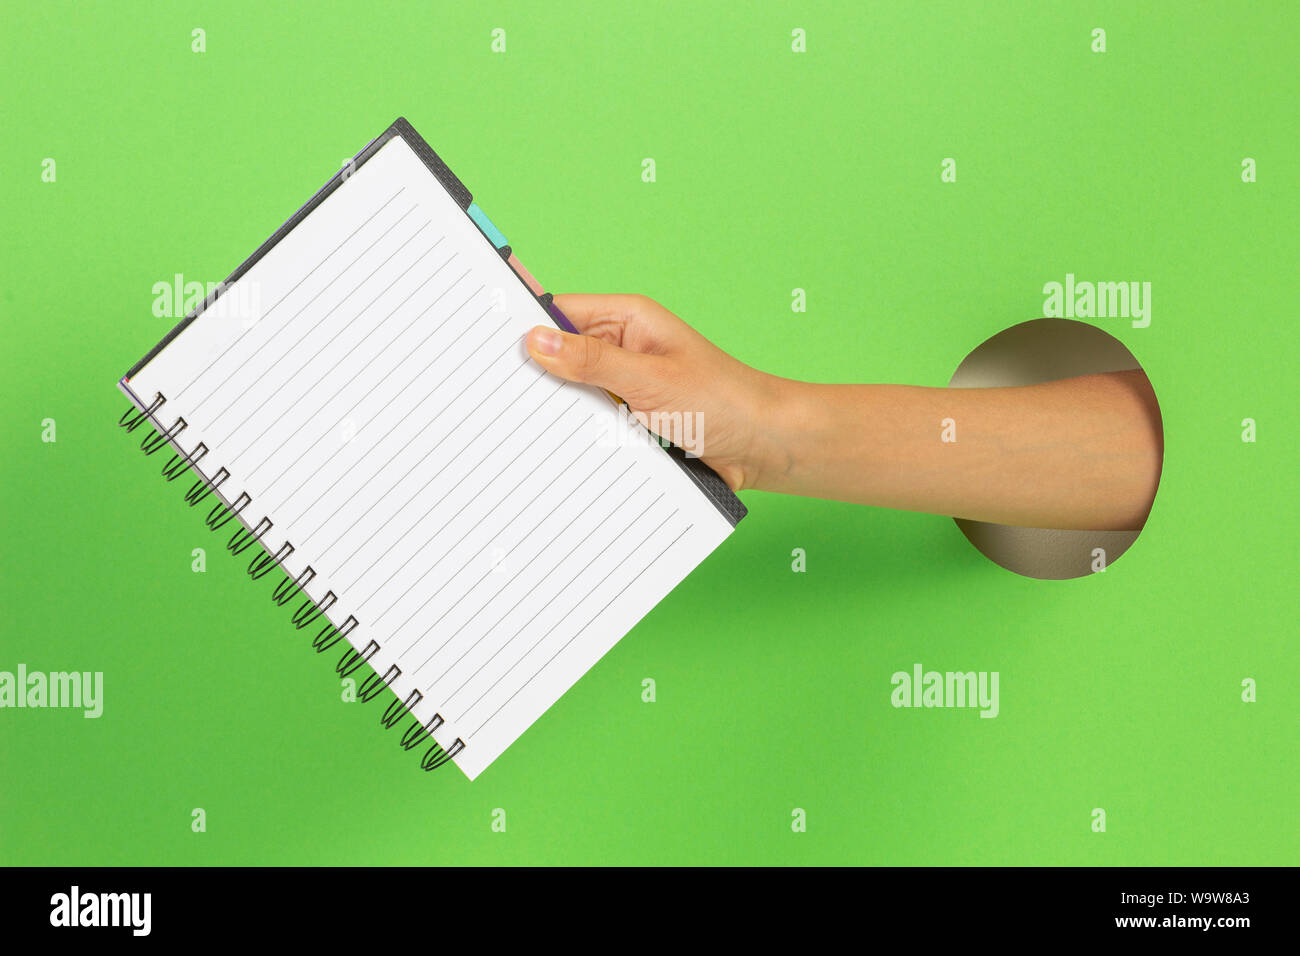 Kid holding open spiral notebook in hand through hole on light green background Stock Photo